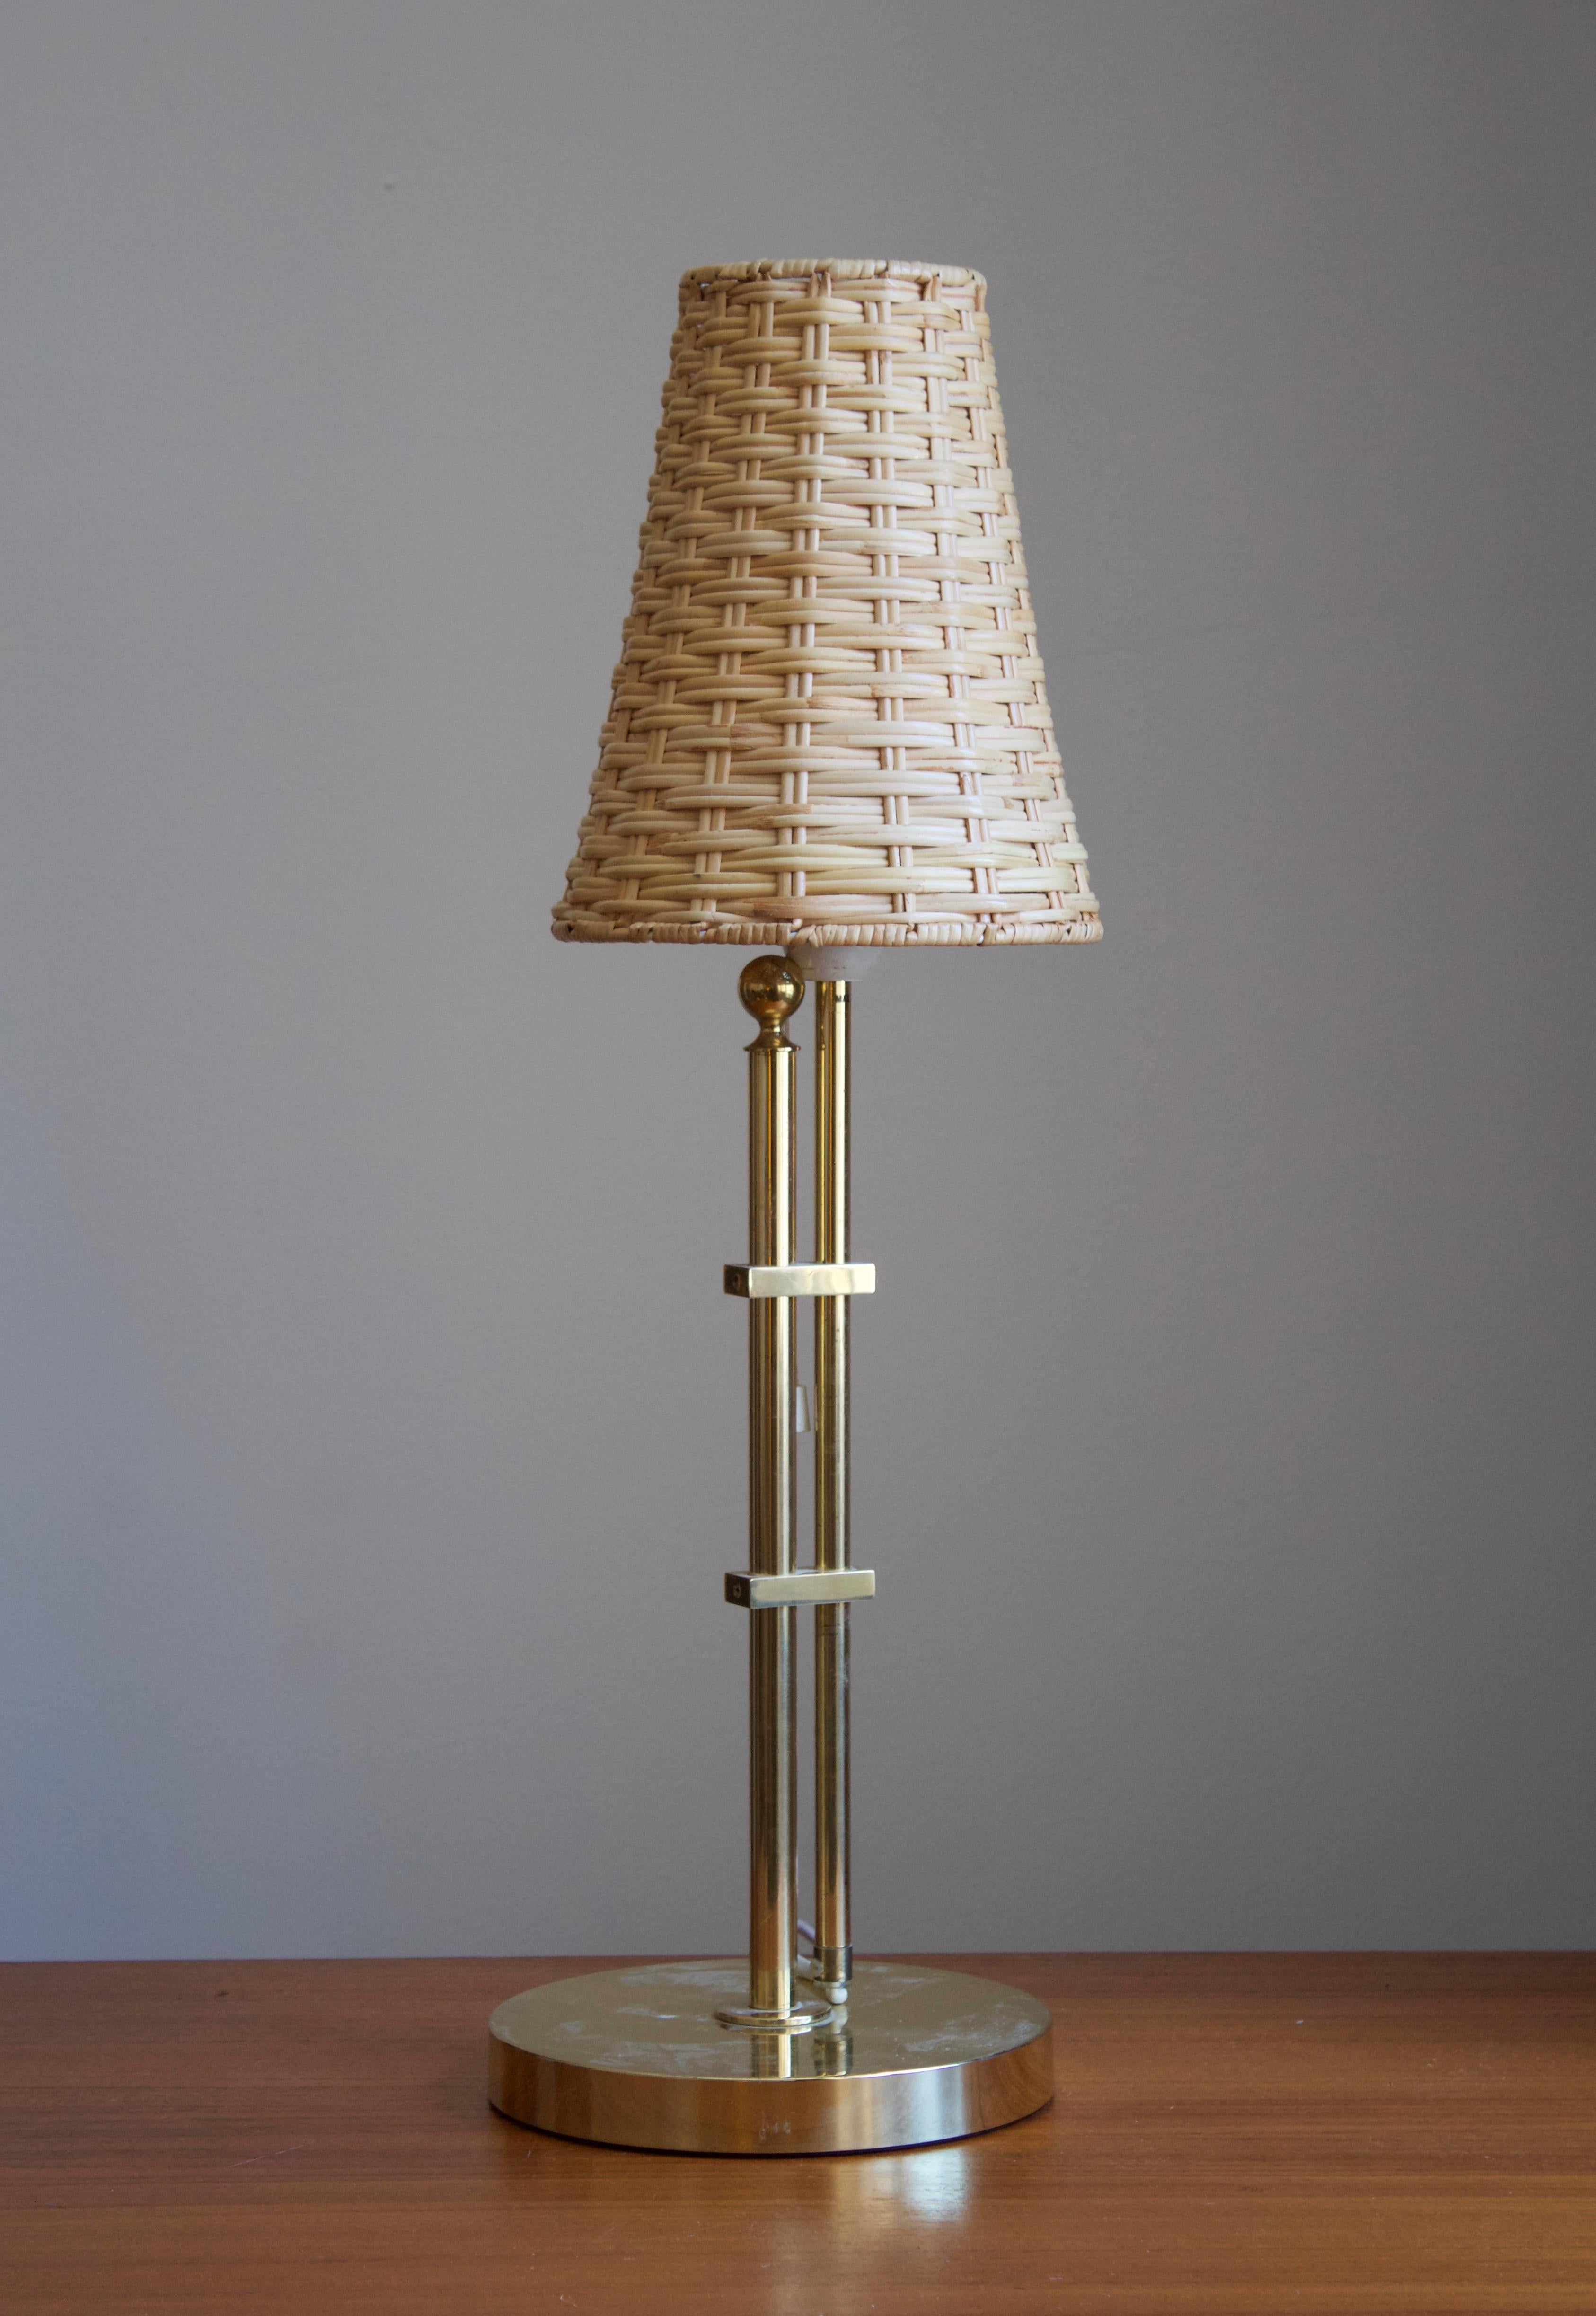 An adjustable table lamp. Designed and produced by Bergboms, Sweden, Designed c. 1960s. This example c. 1970s-1980s production. Assorted vintage rattan lampshade.

Other designers of the period include Paavo Tynell, Hans Bergström, Josef Frank,